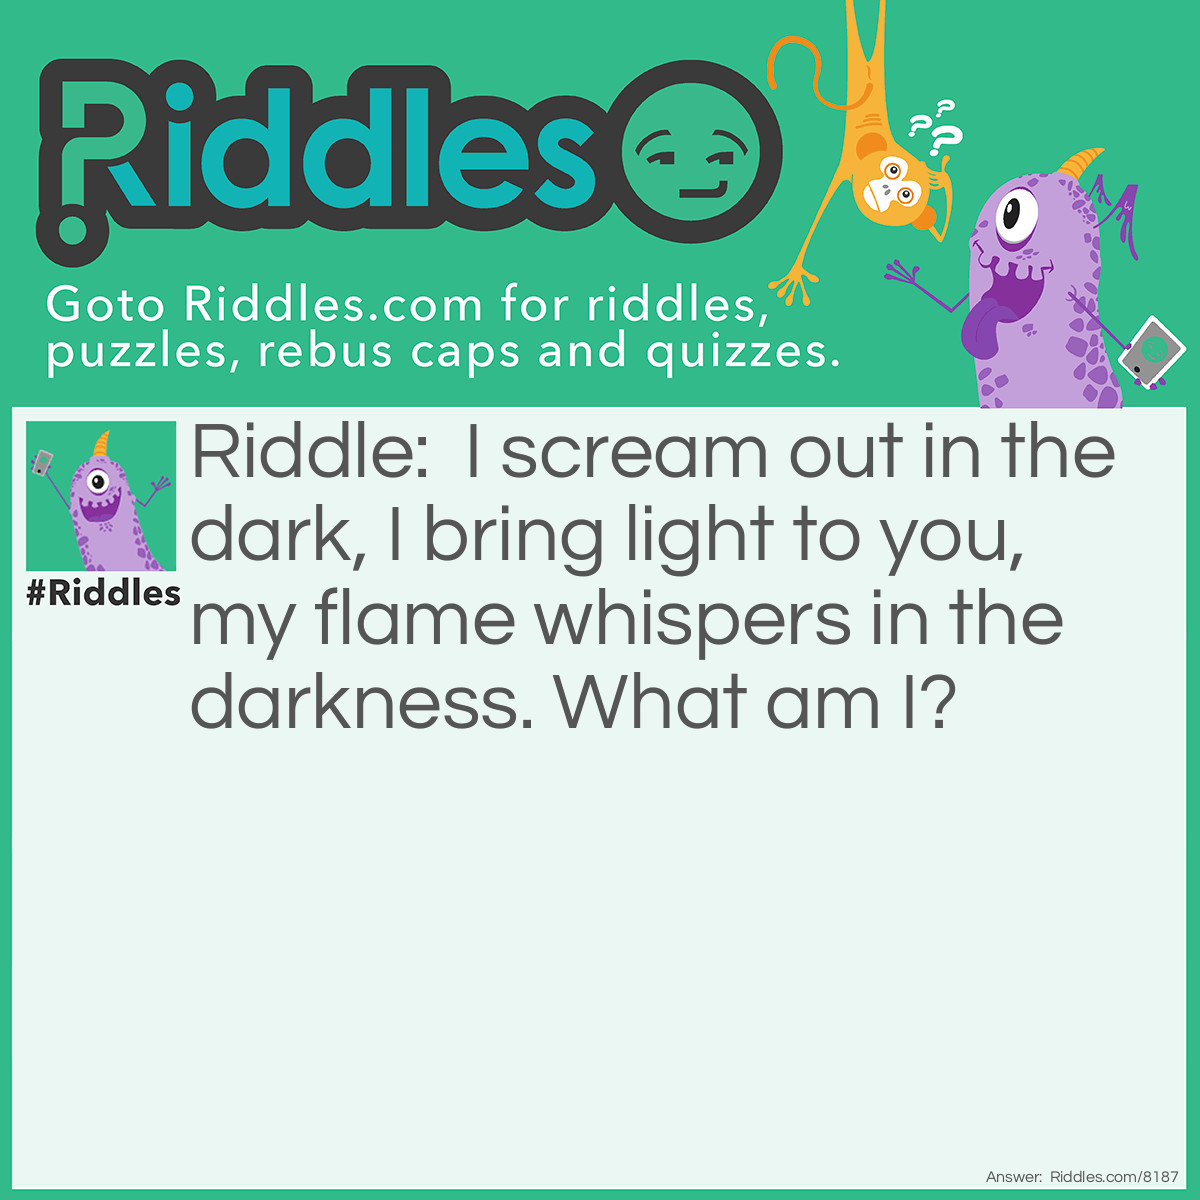 Riddle: I scream out in the dark, I bring light to you, my flame whispers in the darkness. What am I? Answer: A candle.